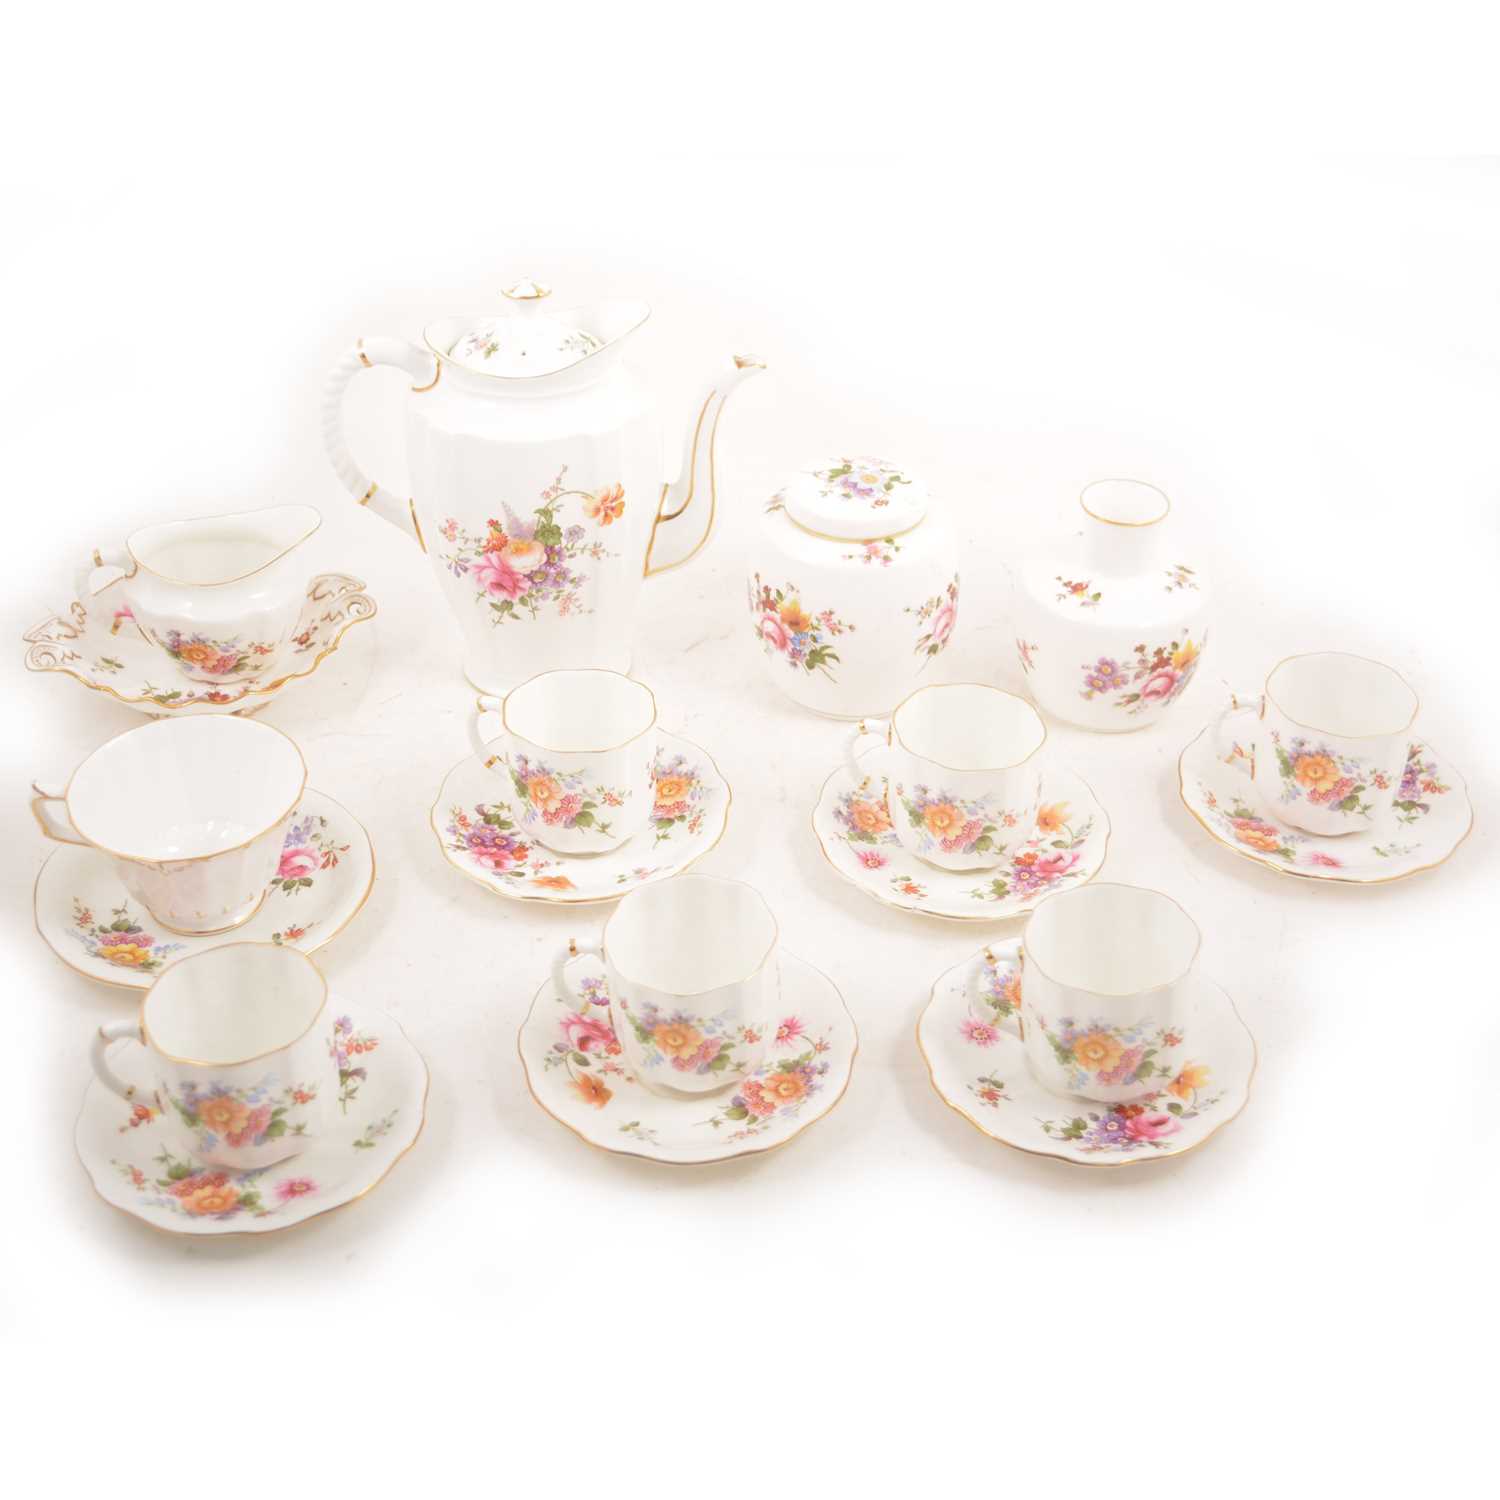 Lot 55 - Royal Crown Derby "Posies" coffee set and related wares.